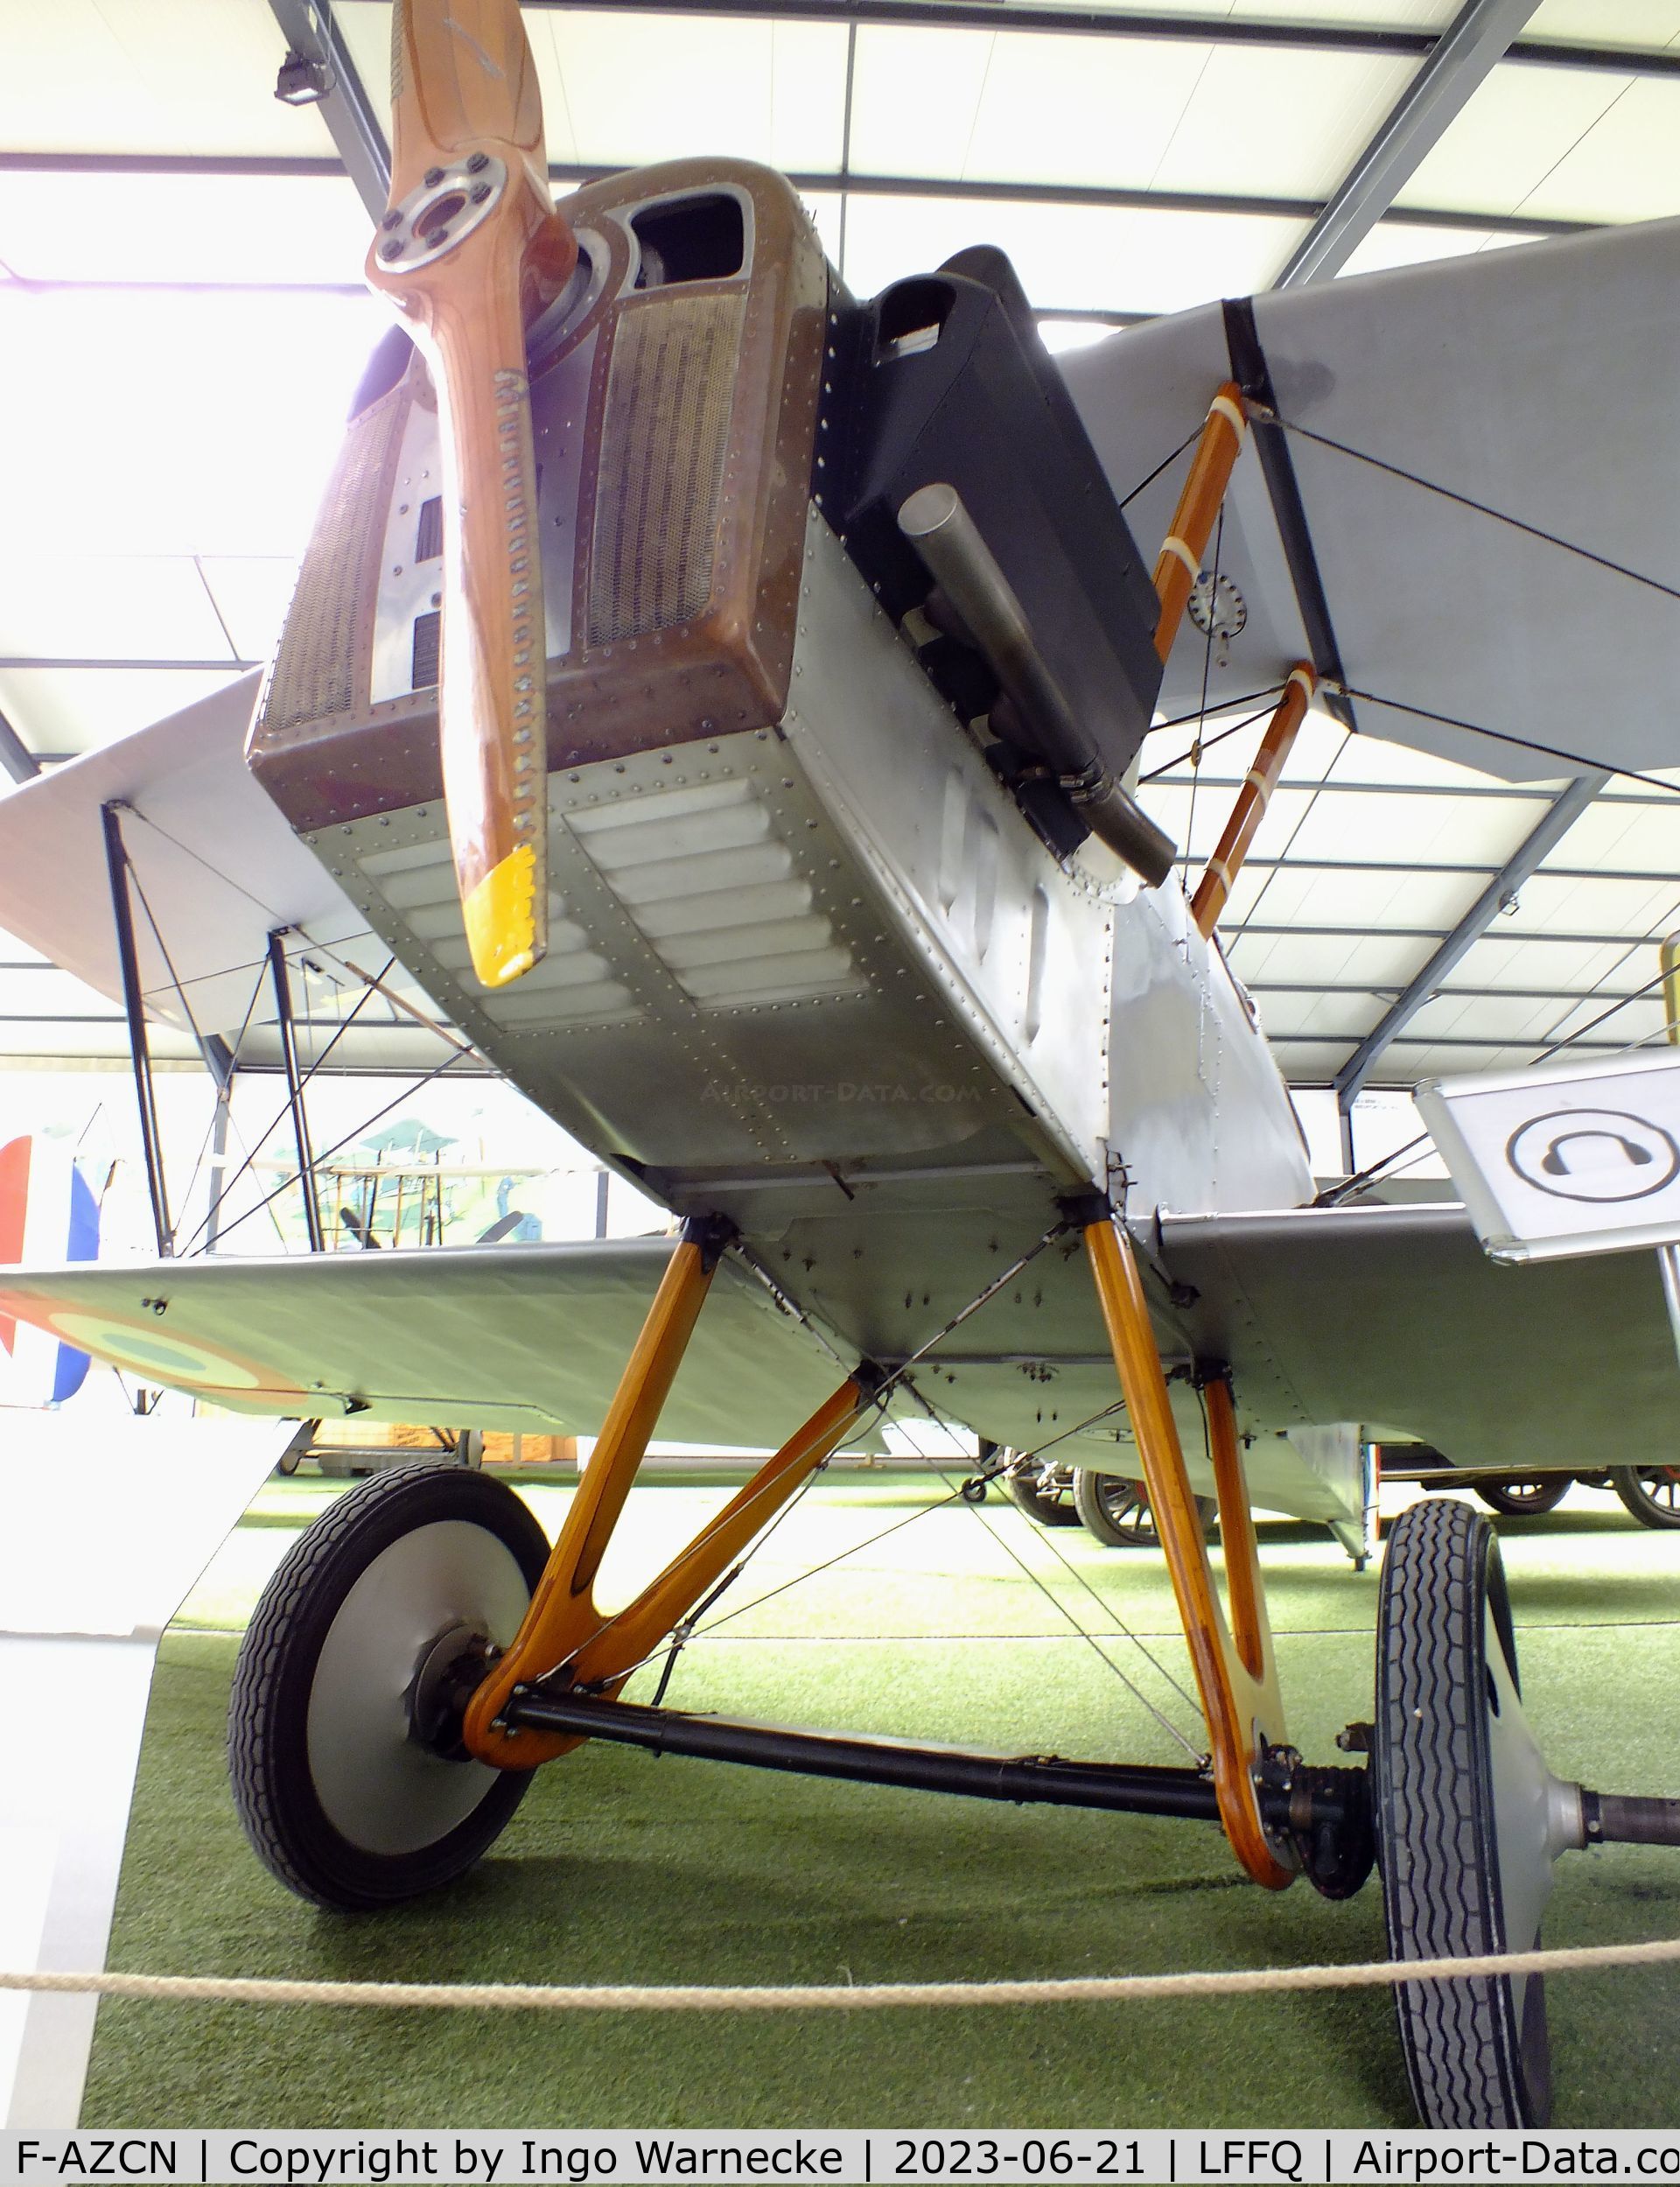 F-AZCN, Royal Aircraft Factory SE-5A Replica C/N 02, Amicale Jean Salis R.A.F. S.E.5 two-seater look-alike (converted from a Stampe SV-4) at the Musee Volant Salis/Aero Vintage Academy, Cerny